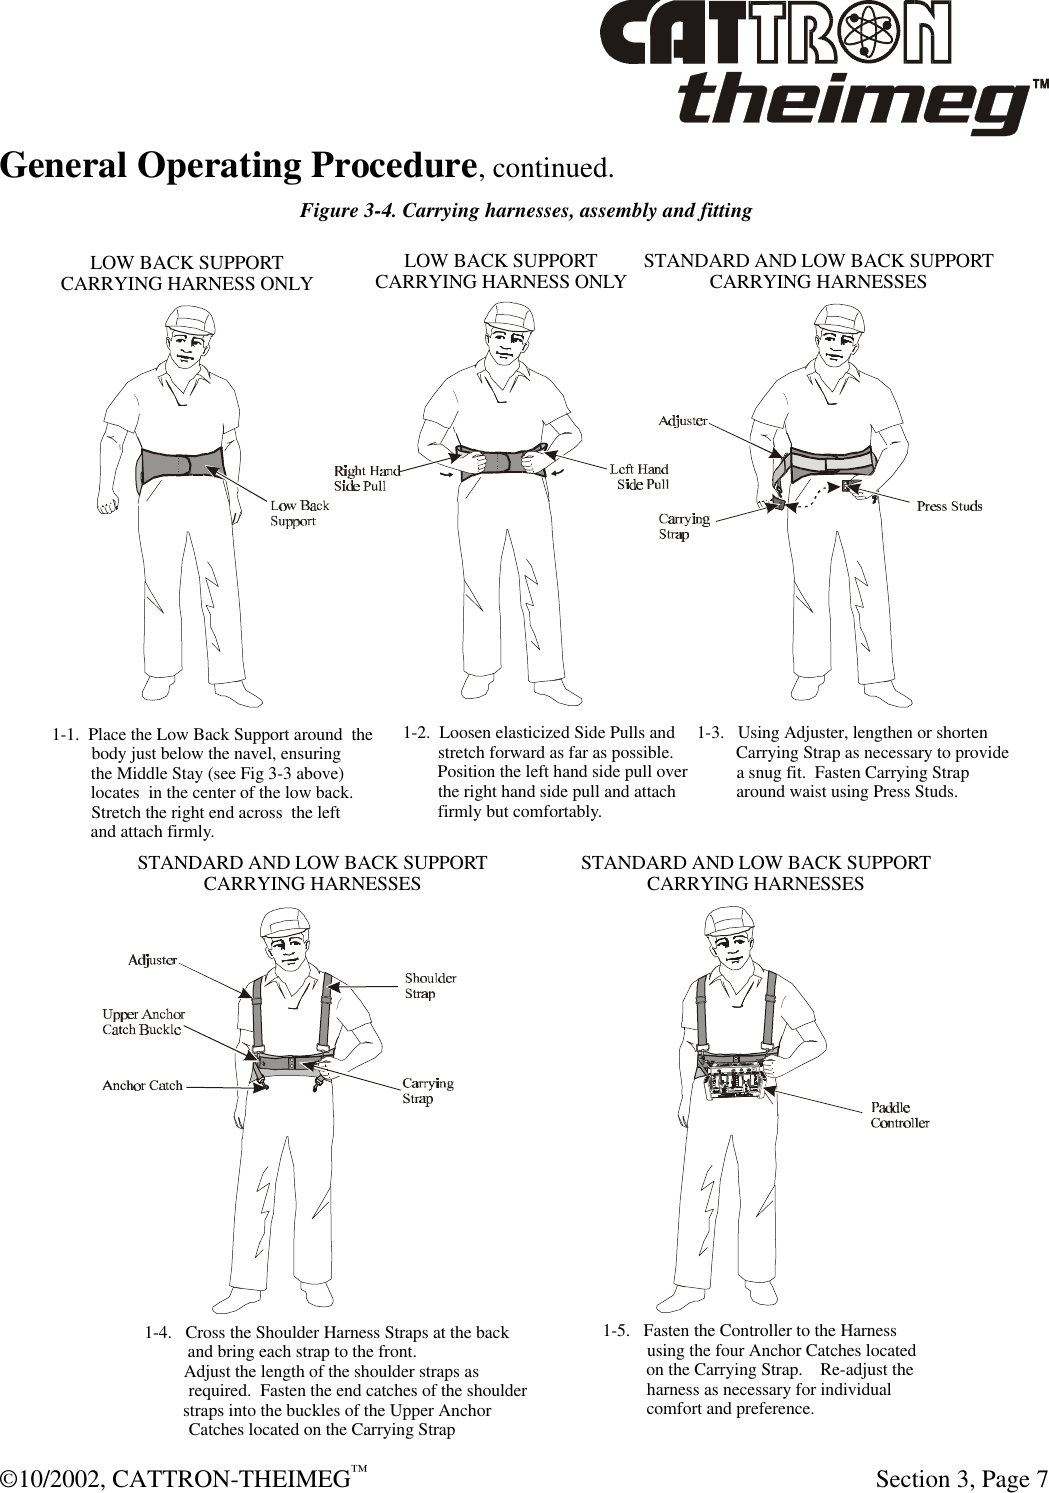  ©10/2002, CATTRON-THEIMEG™   Section 3, Page 7 General Operating Procedure, continued.   Figure 3-4. Carrying harnesses, assembly and fitting 1-1.  Place the Low Back Support around  the         body just below the navel, ensuring         the Middle Stay (see Fig 3-3 above)         locates  in the center of the low back.         Stretch the right end across  the left         and attach firmly.1-2.  Loosen elasticized Side Pulls and        stretch forward as far as possible.        Position the left hand side pull over        the right hand side pull and attach        firmly but comfortably.1-3.   Using Adjuster, lengthen or shorten         Carrying Strap as necessary to provide         a snug fit.  Fasten Carrying Strap         around waist using Press Studs.1-4.   Cross the Shoulder Harness Straps at the back          and bring each strap to the front.         Adjust the length of the shoulder straps as          required.  Fasten the end catches of the shoulder         straps into the buckles of the Upper Anchor          Catches located on the Carrying Strap 1-5.   Fasten the Controller to the Harness          using the four Anchor Catches located          on the Carrying Strap.    Re-adjust the          harness as necessary for individual          comfort and preference.        LOW BACK SUPPORTCARRYING HARNESS ONLYSTANDARD AND LOW BACK SUPPORTCARRYING HARNESSESSTANDARD AND LOW BACK SUPPORTCARRYING HARNESSESSTANDARD AND LOW BACK SUPPORTCARRYING HARNESSESLOW BACK SUPPORTCARRYING HARNESS ONLY